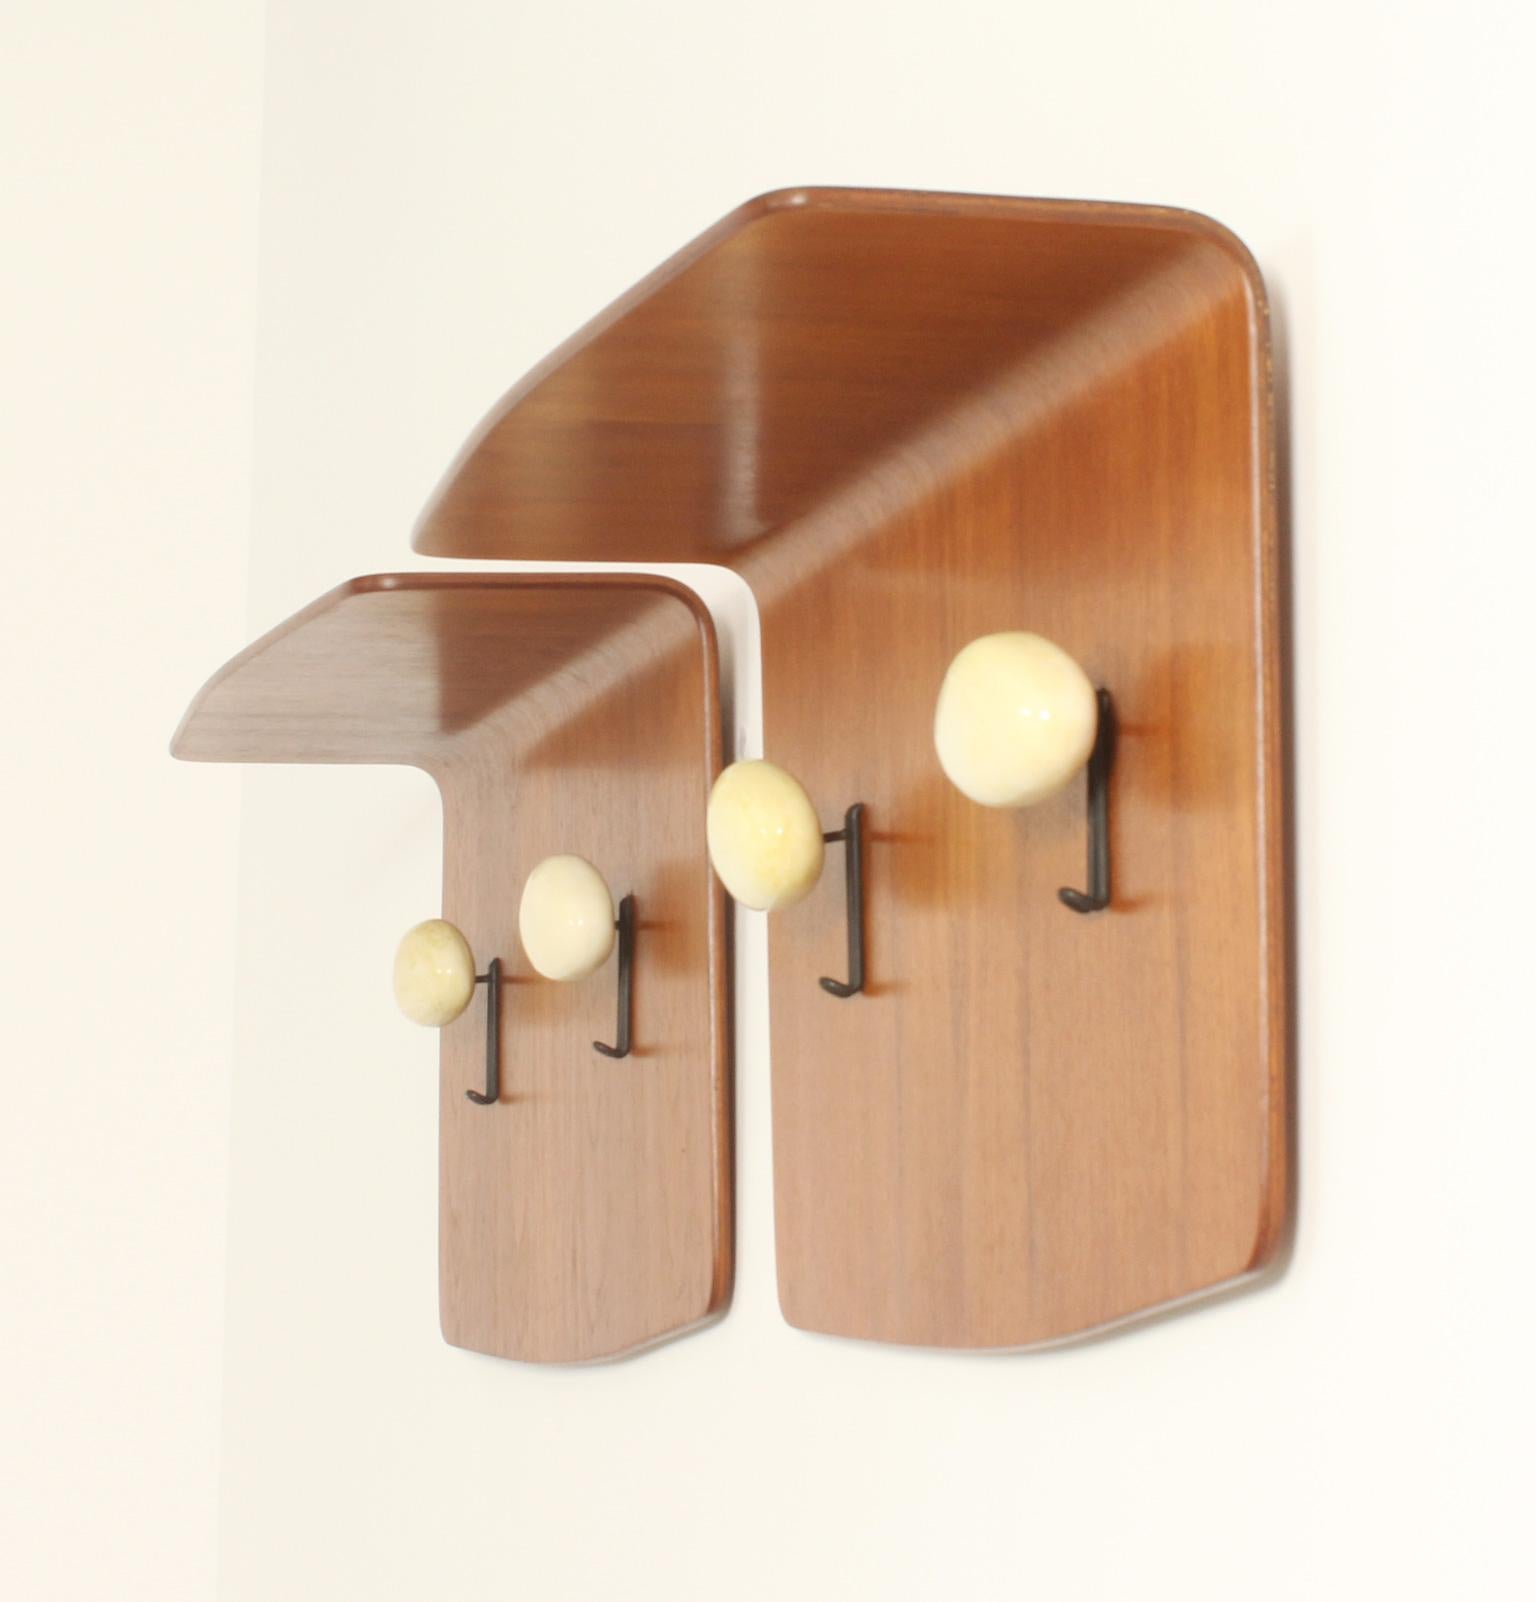 Pair of wall-mounted coat racks designed in 1950's by Franco Campo and Carlo Graffi for Home, Italy. Curved teak wood and two metal and ceramic coat hooks by the Italian ceramist Victor Cerrato. Signed with Home label. 